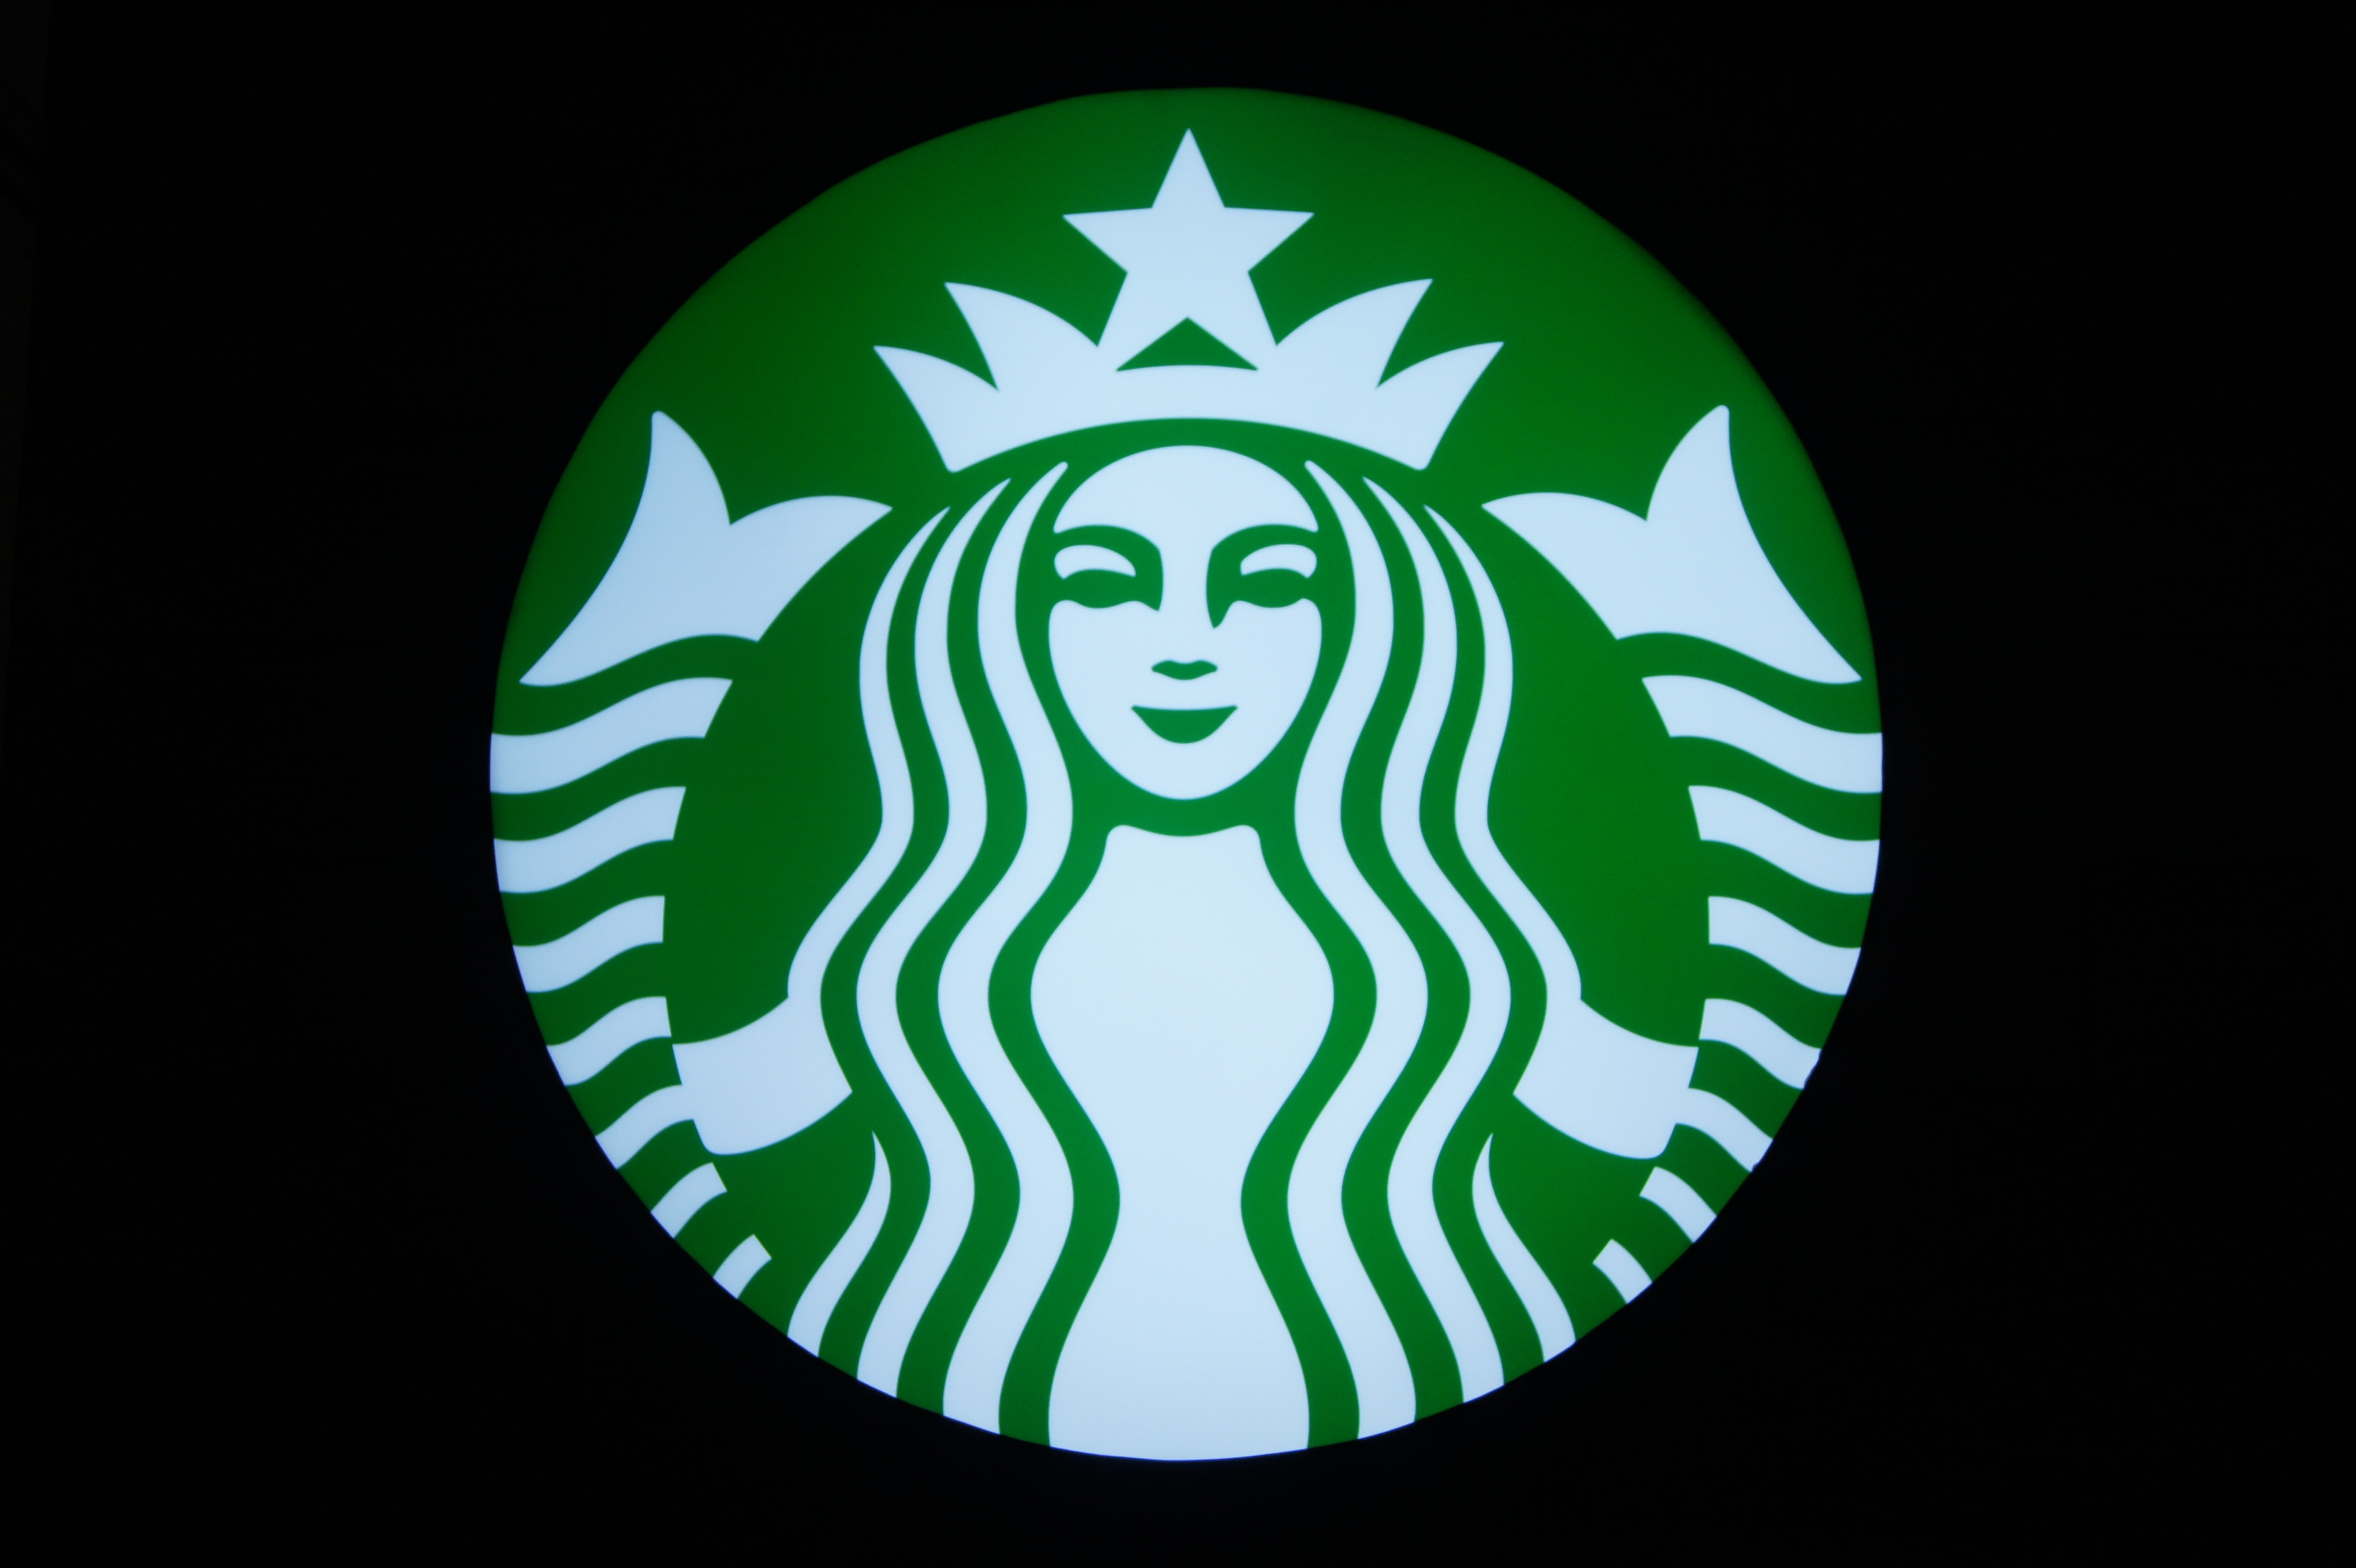 Starbucks, Coffee, The Coffee Shop, green color, black background